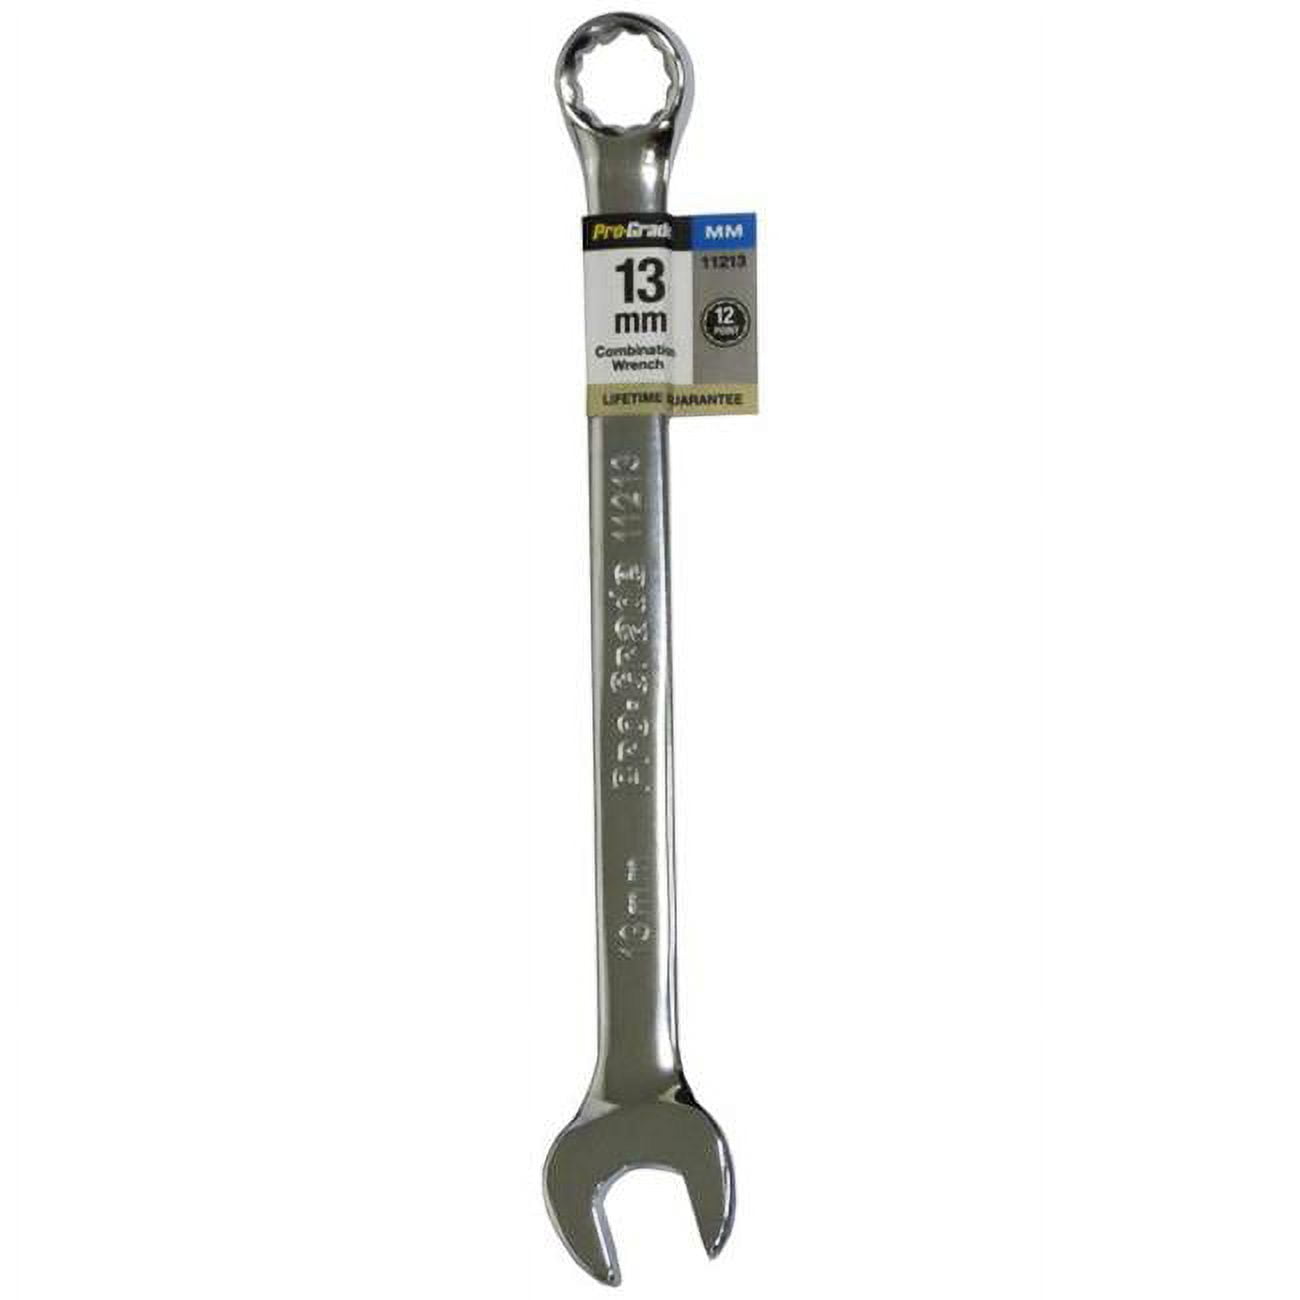 Picture of Pro-Grade 11213 13 mm Combination Wrench